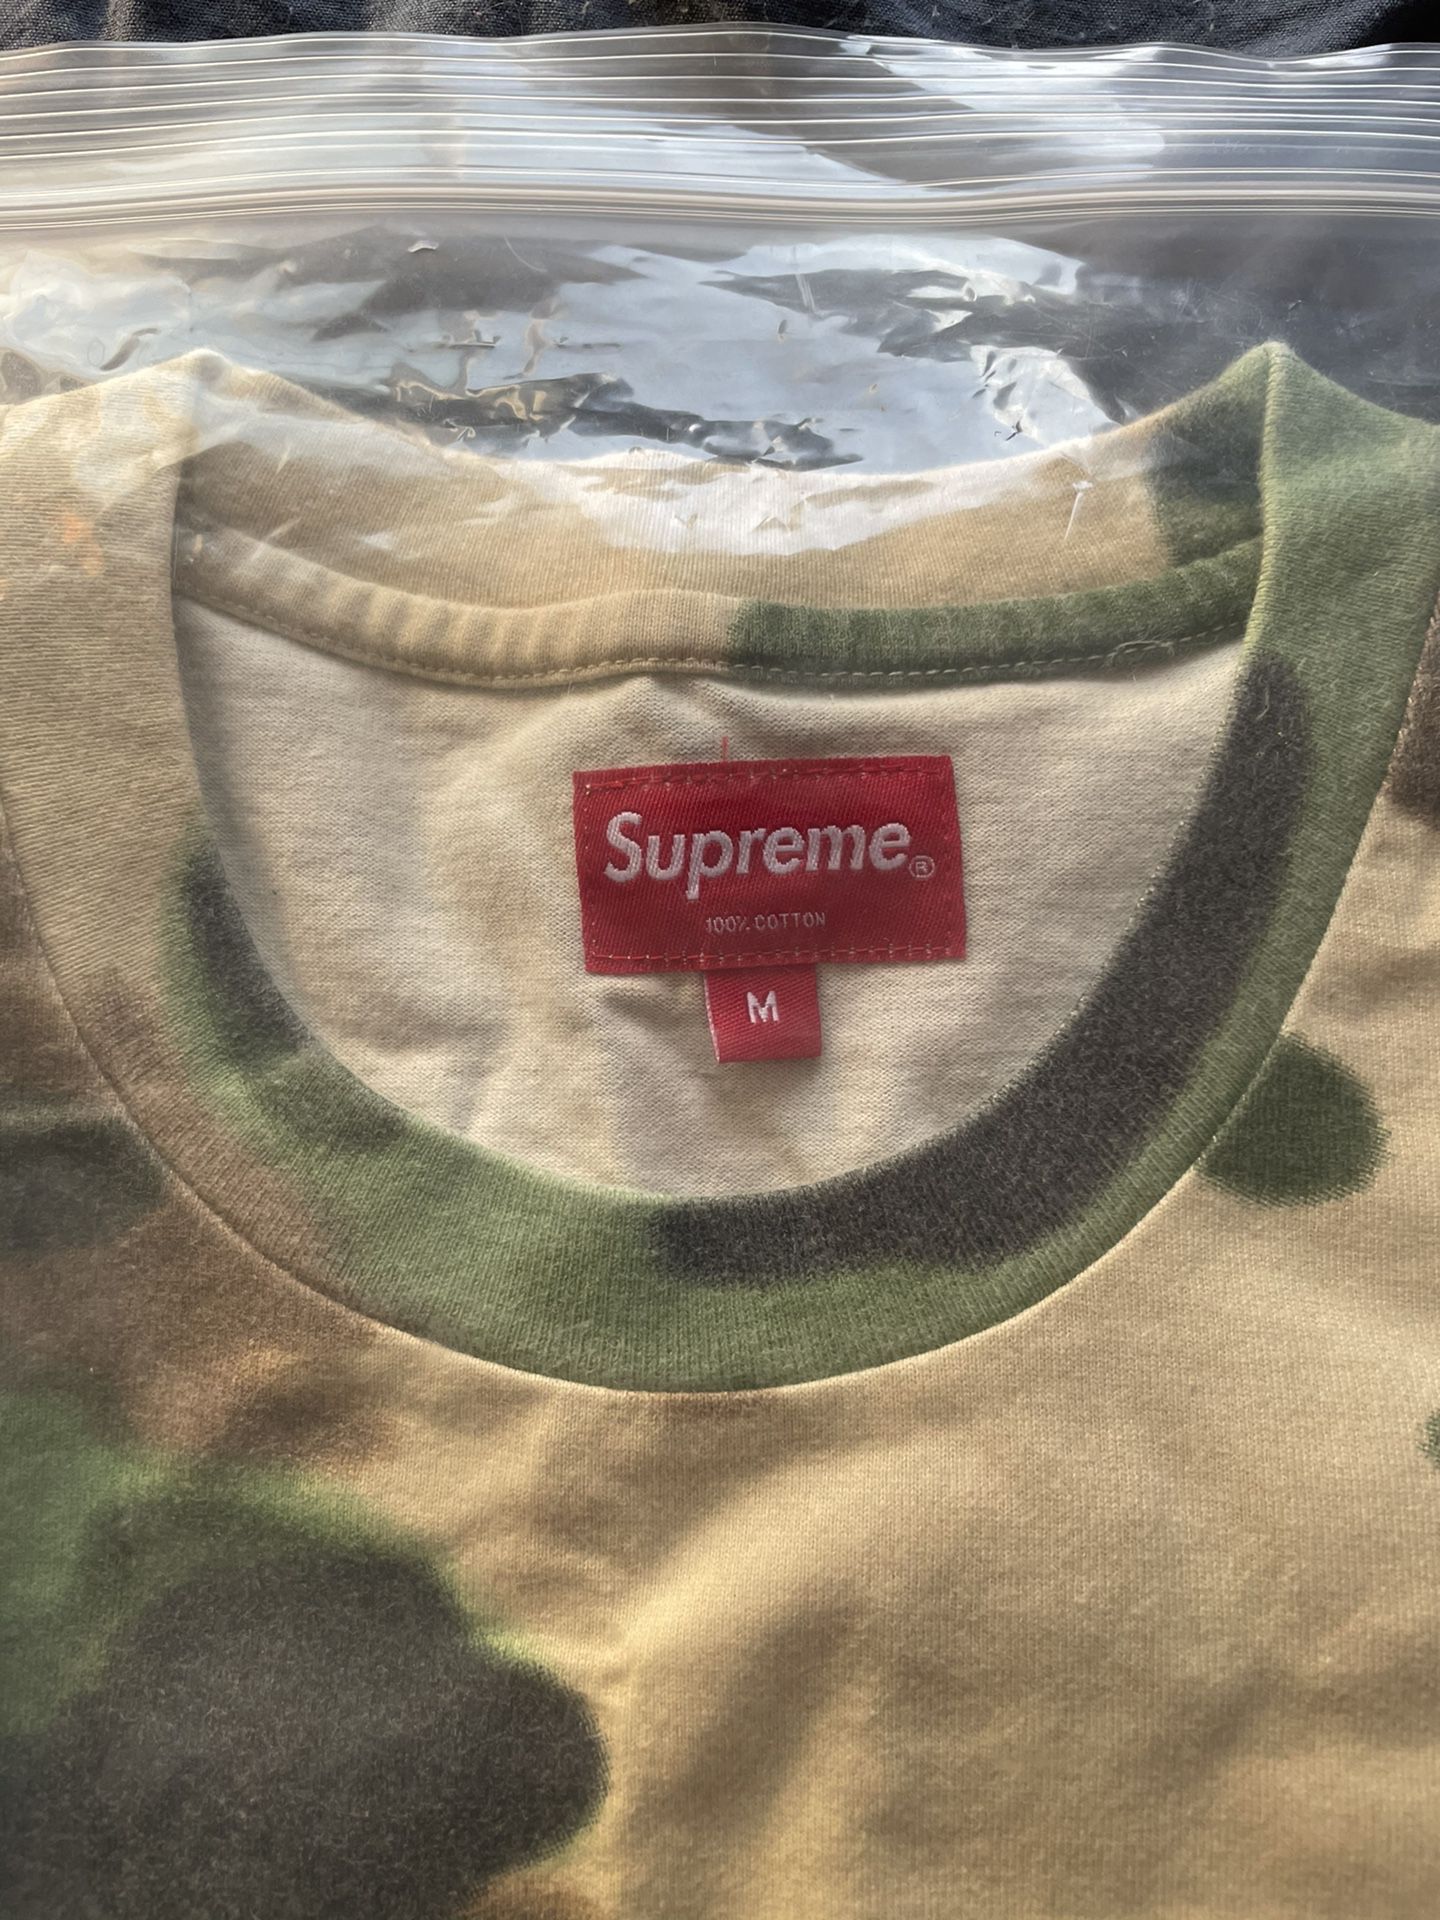 Supreme Camo Shirt Size Medium for Sale in New York, NY   OfferUp